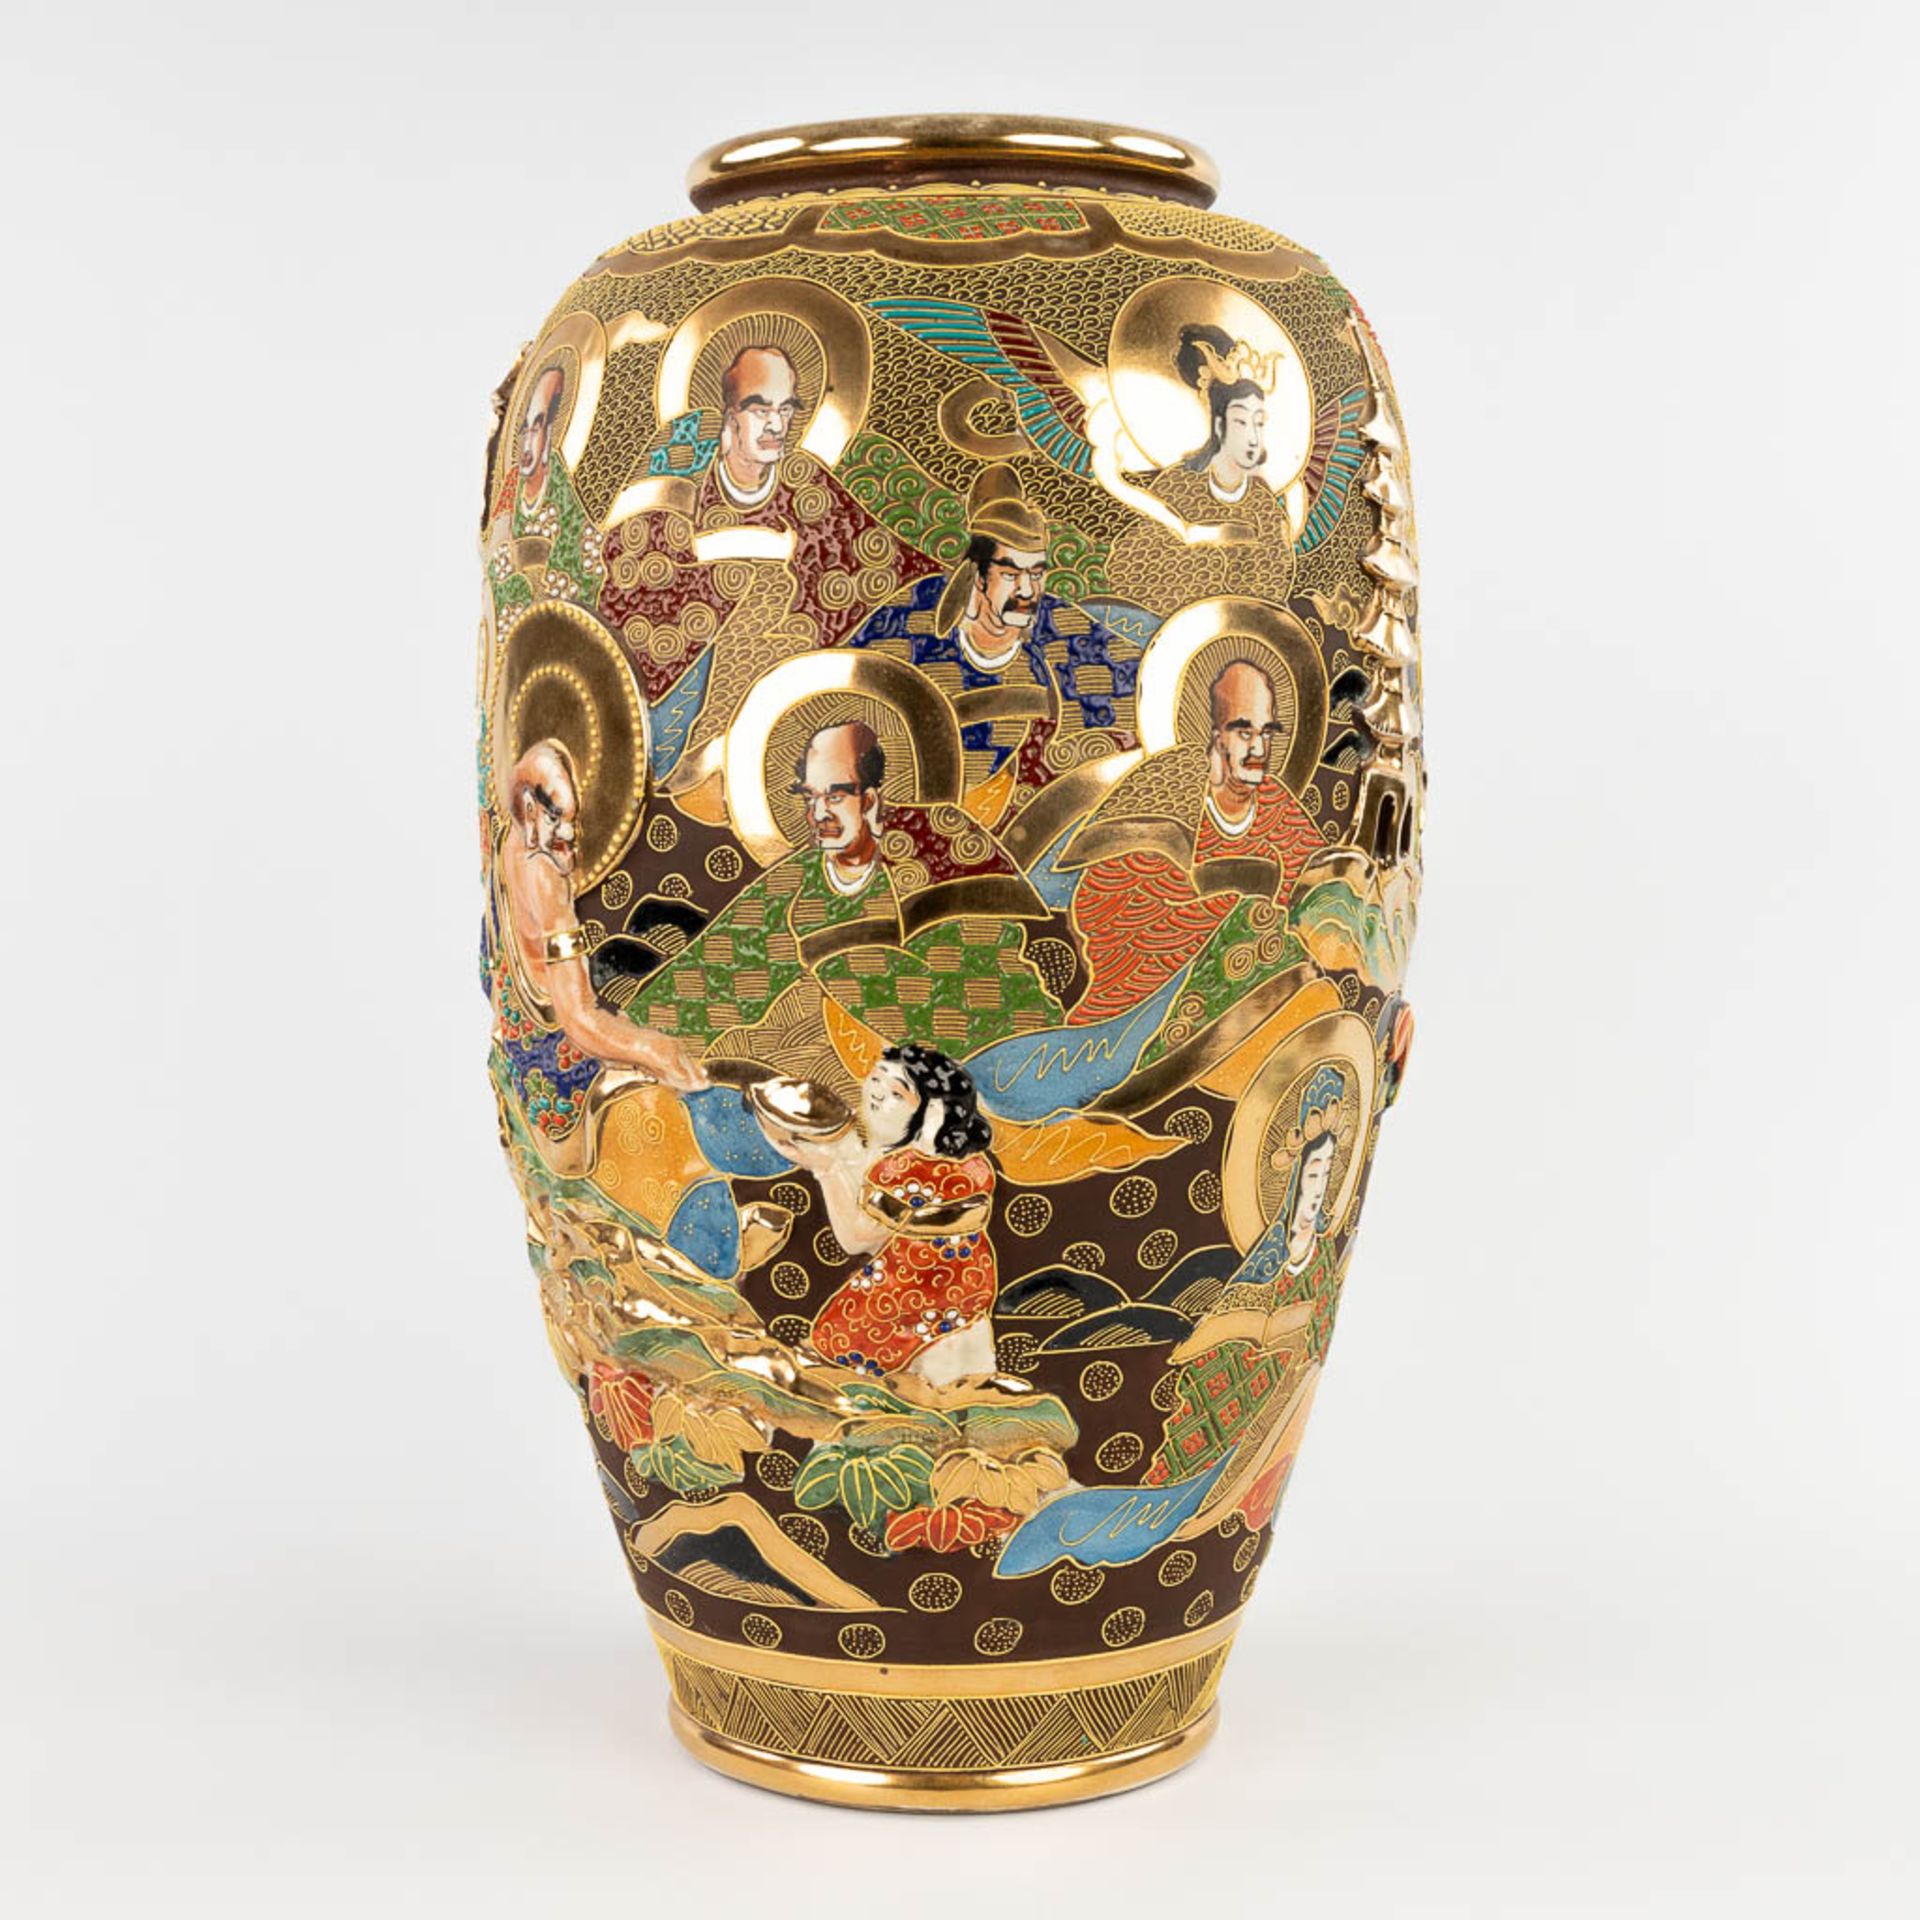 A large vase, Satsuma faience decorated with men and ladies, Japan. 20th C. (H:48 x D:28 cm) - Image 3 of 17